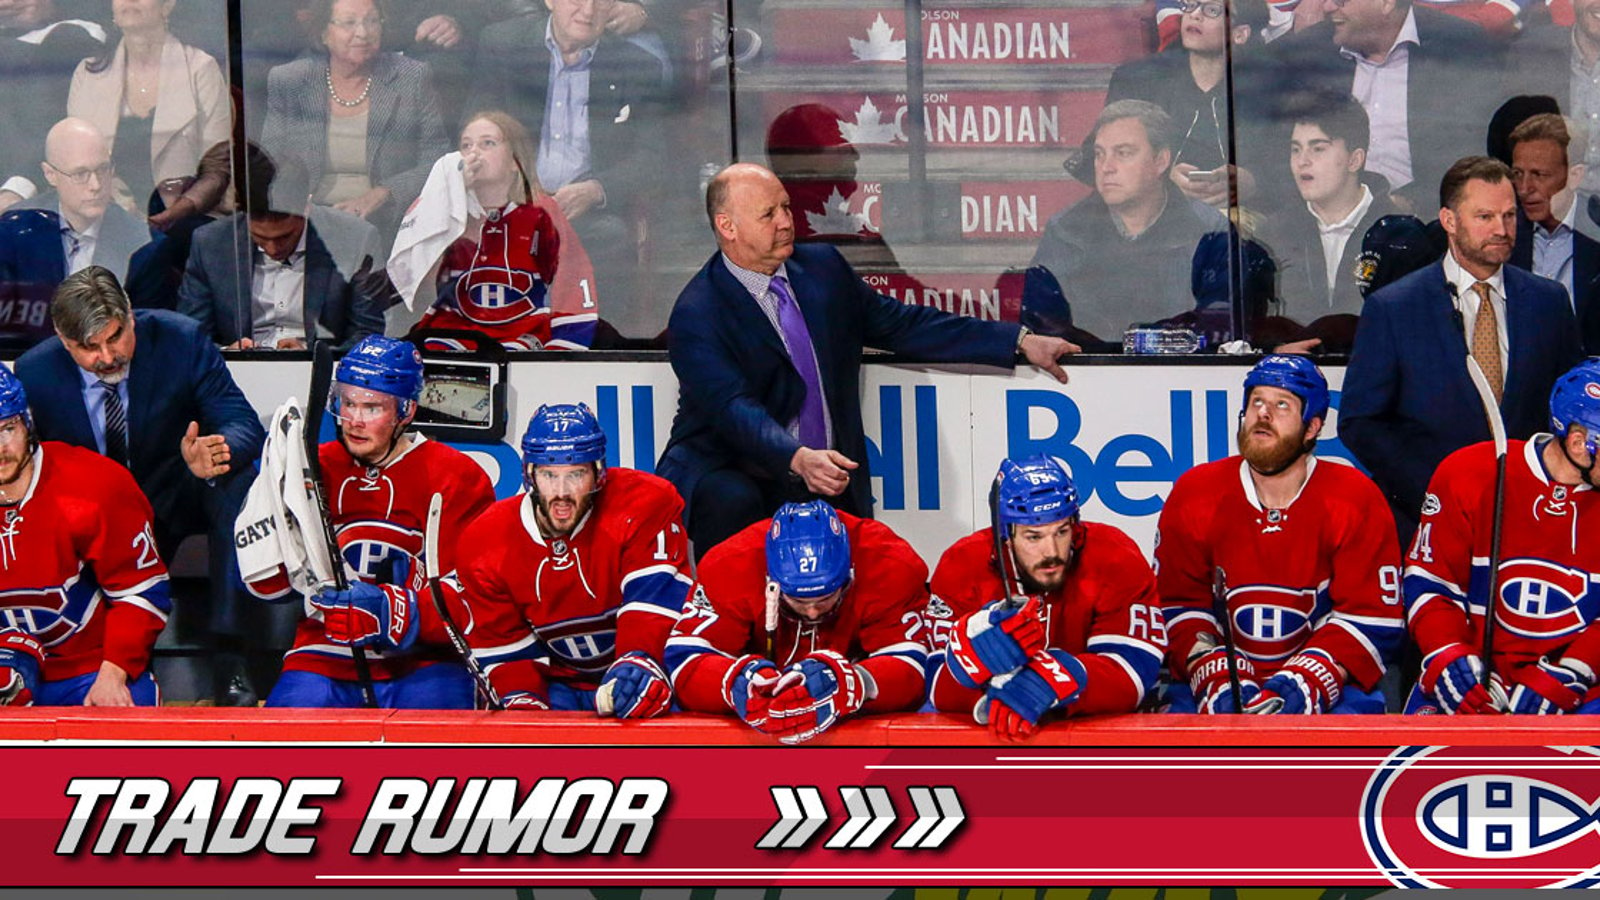 TRADE RUMOR: Montreal GM has reportedly had enough with two PROMISING players